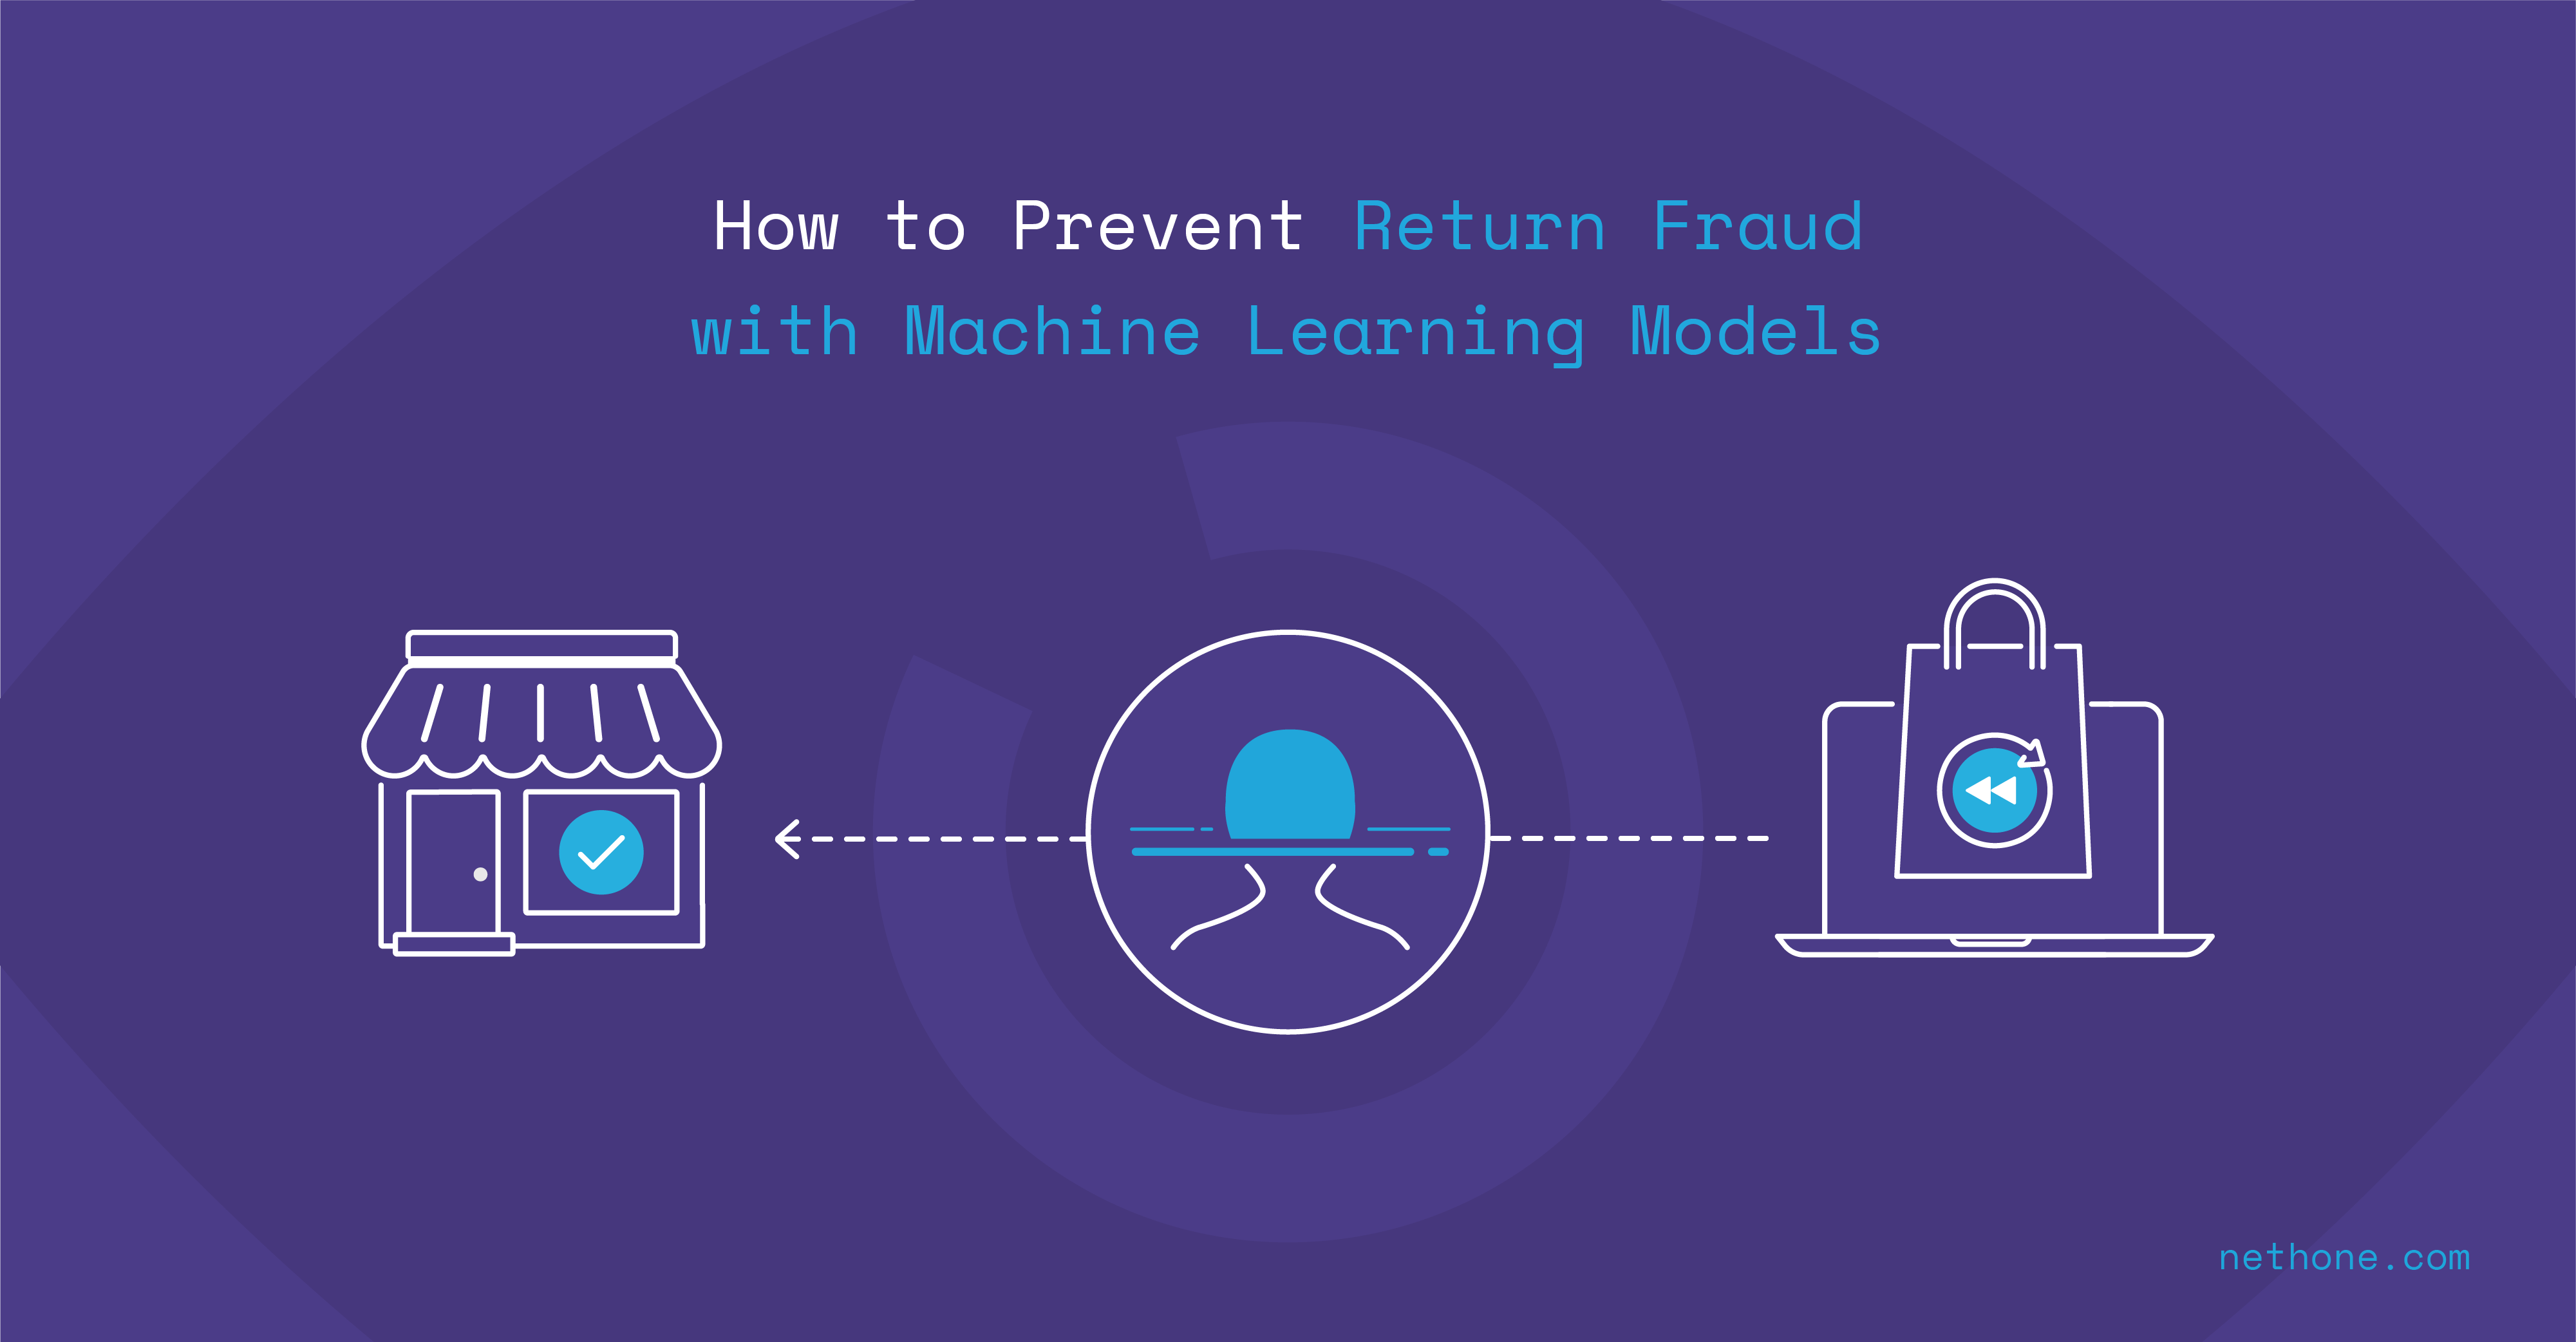 How to Prevent Return Fraud with Machine Learning Models